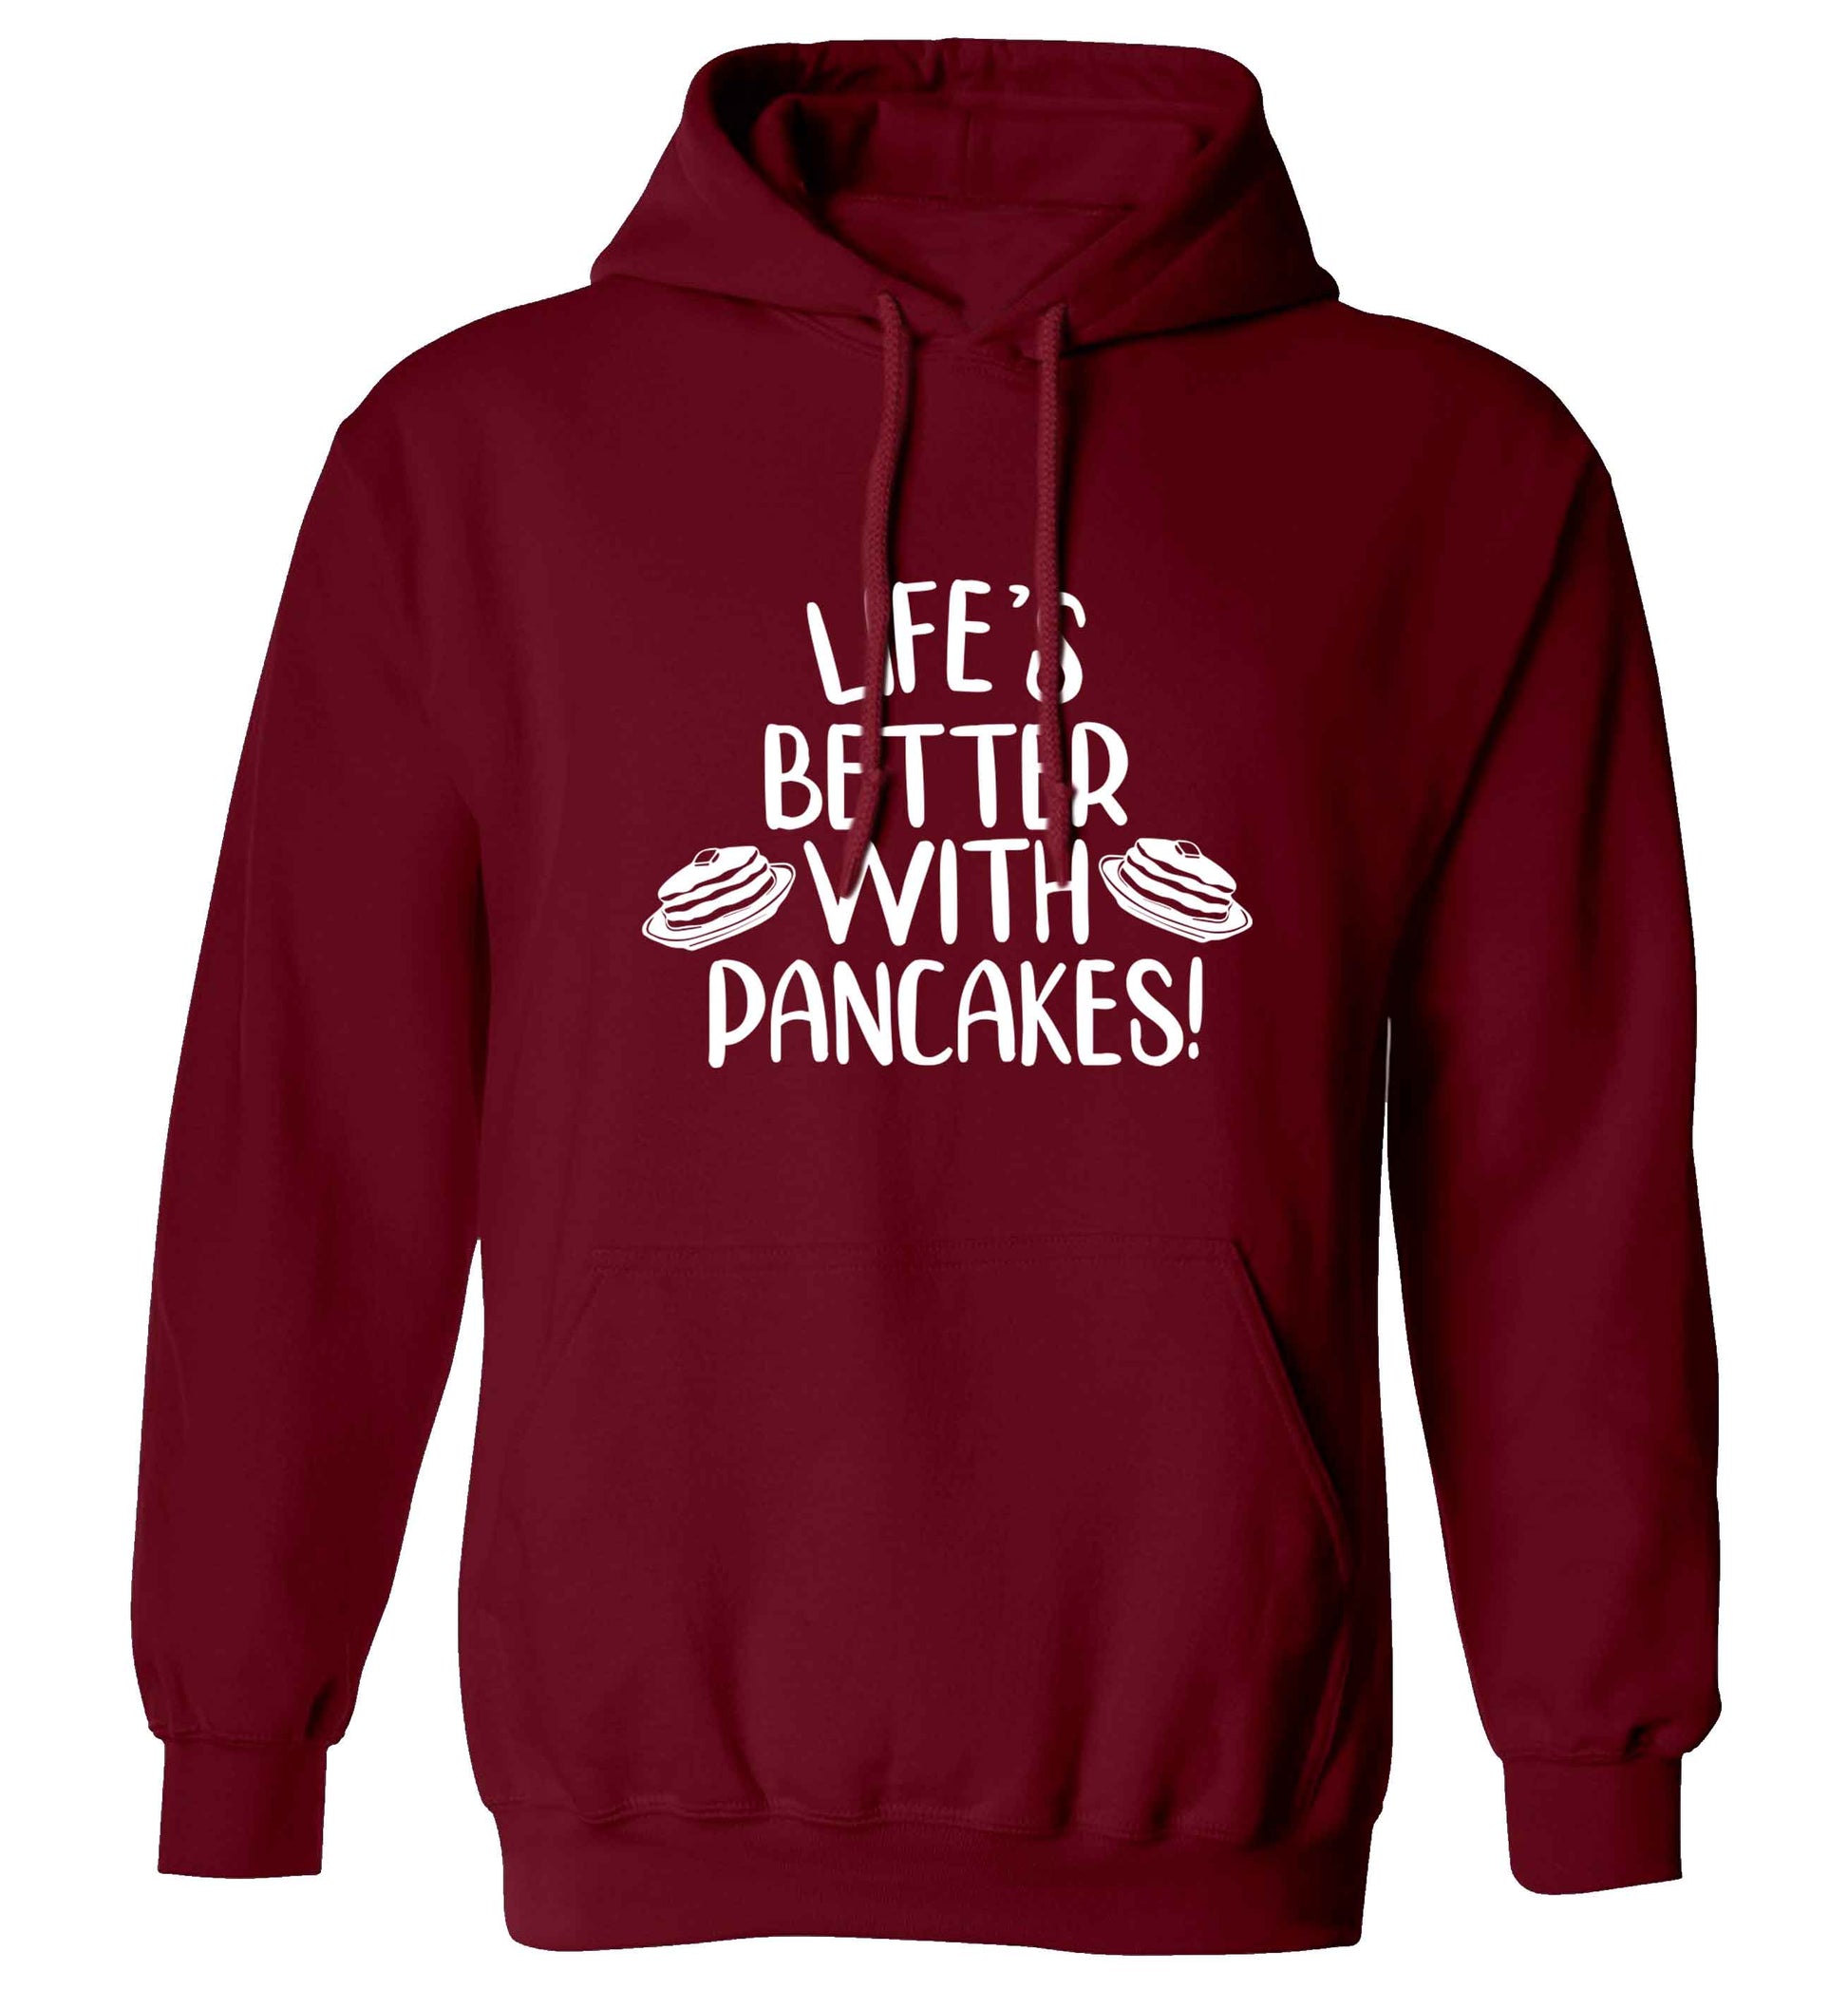 Life's better with pancakes adults unisex maroon hoodie 2XL